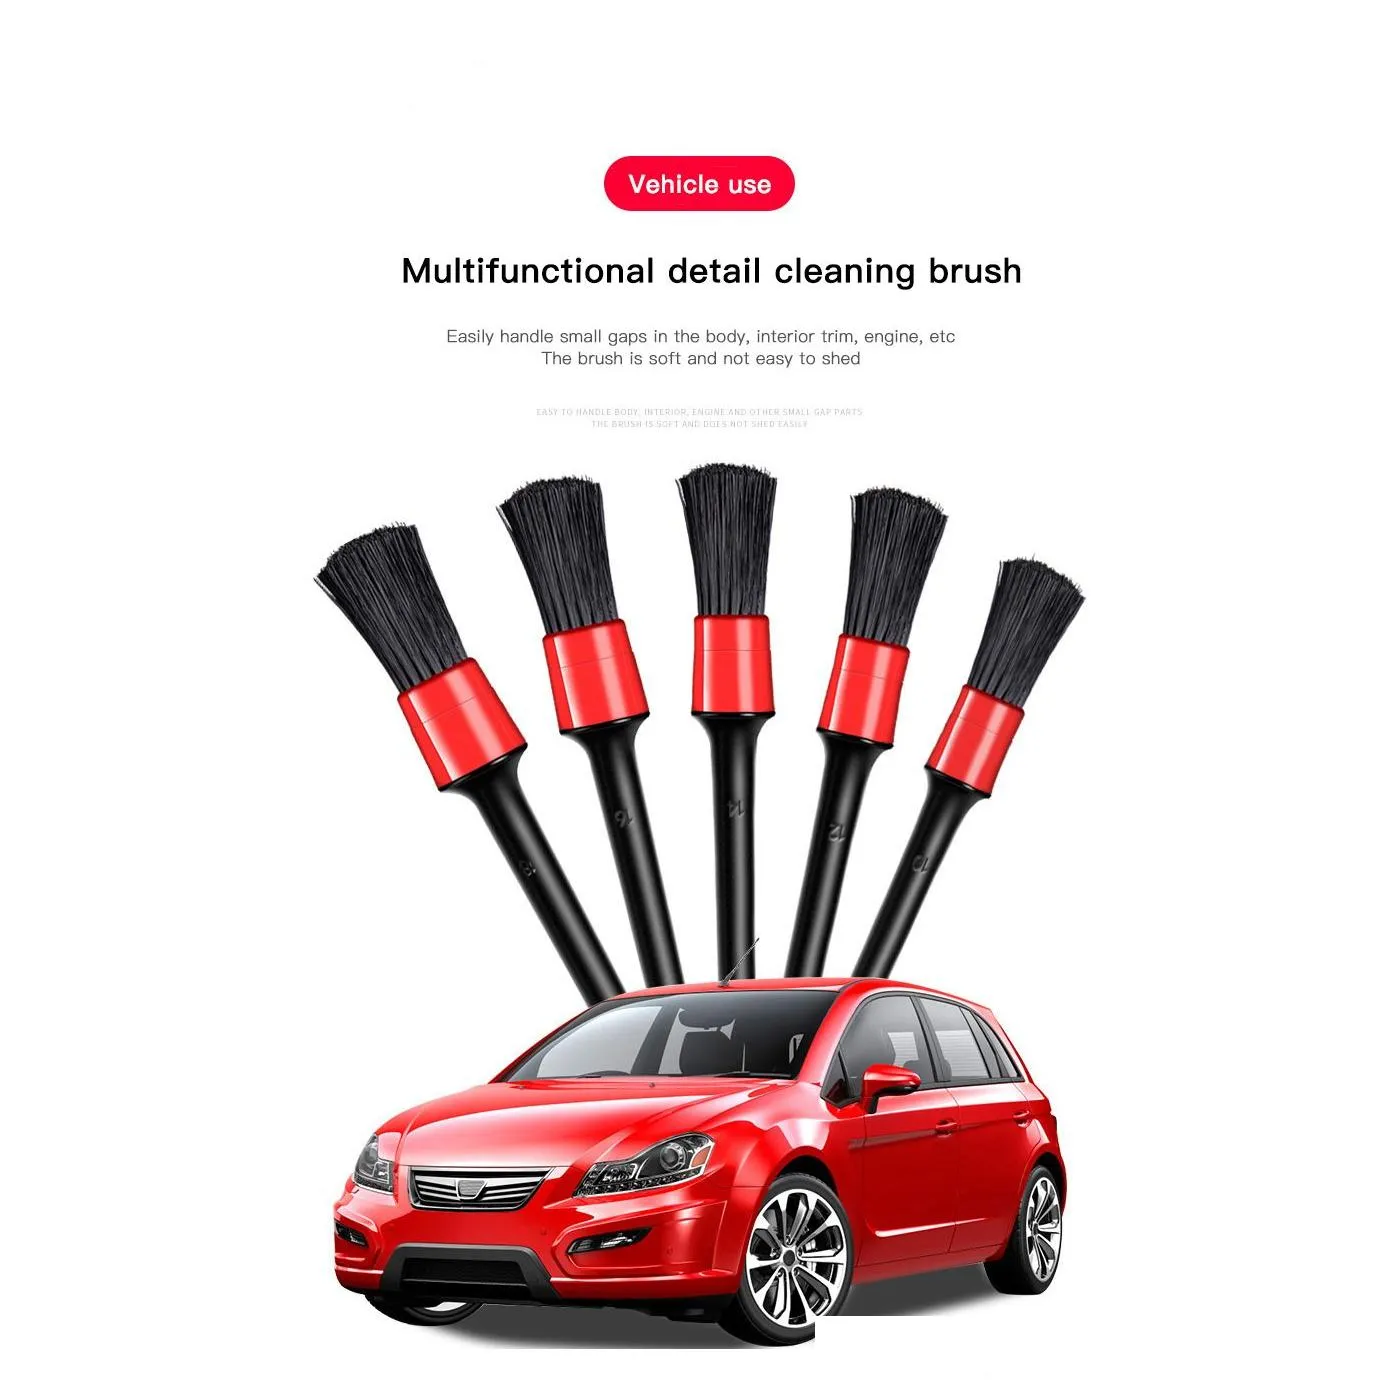 New Car Detail Cleaning Brush 5 Different Sizes Car Detailing Brush Set for Cleaning Car Interior Air Vent Automotive Brushes Kit